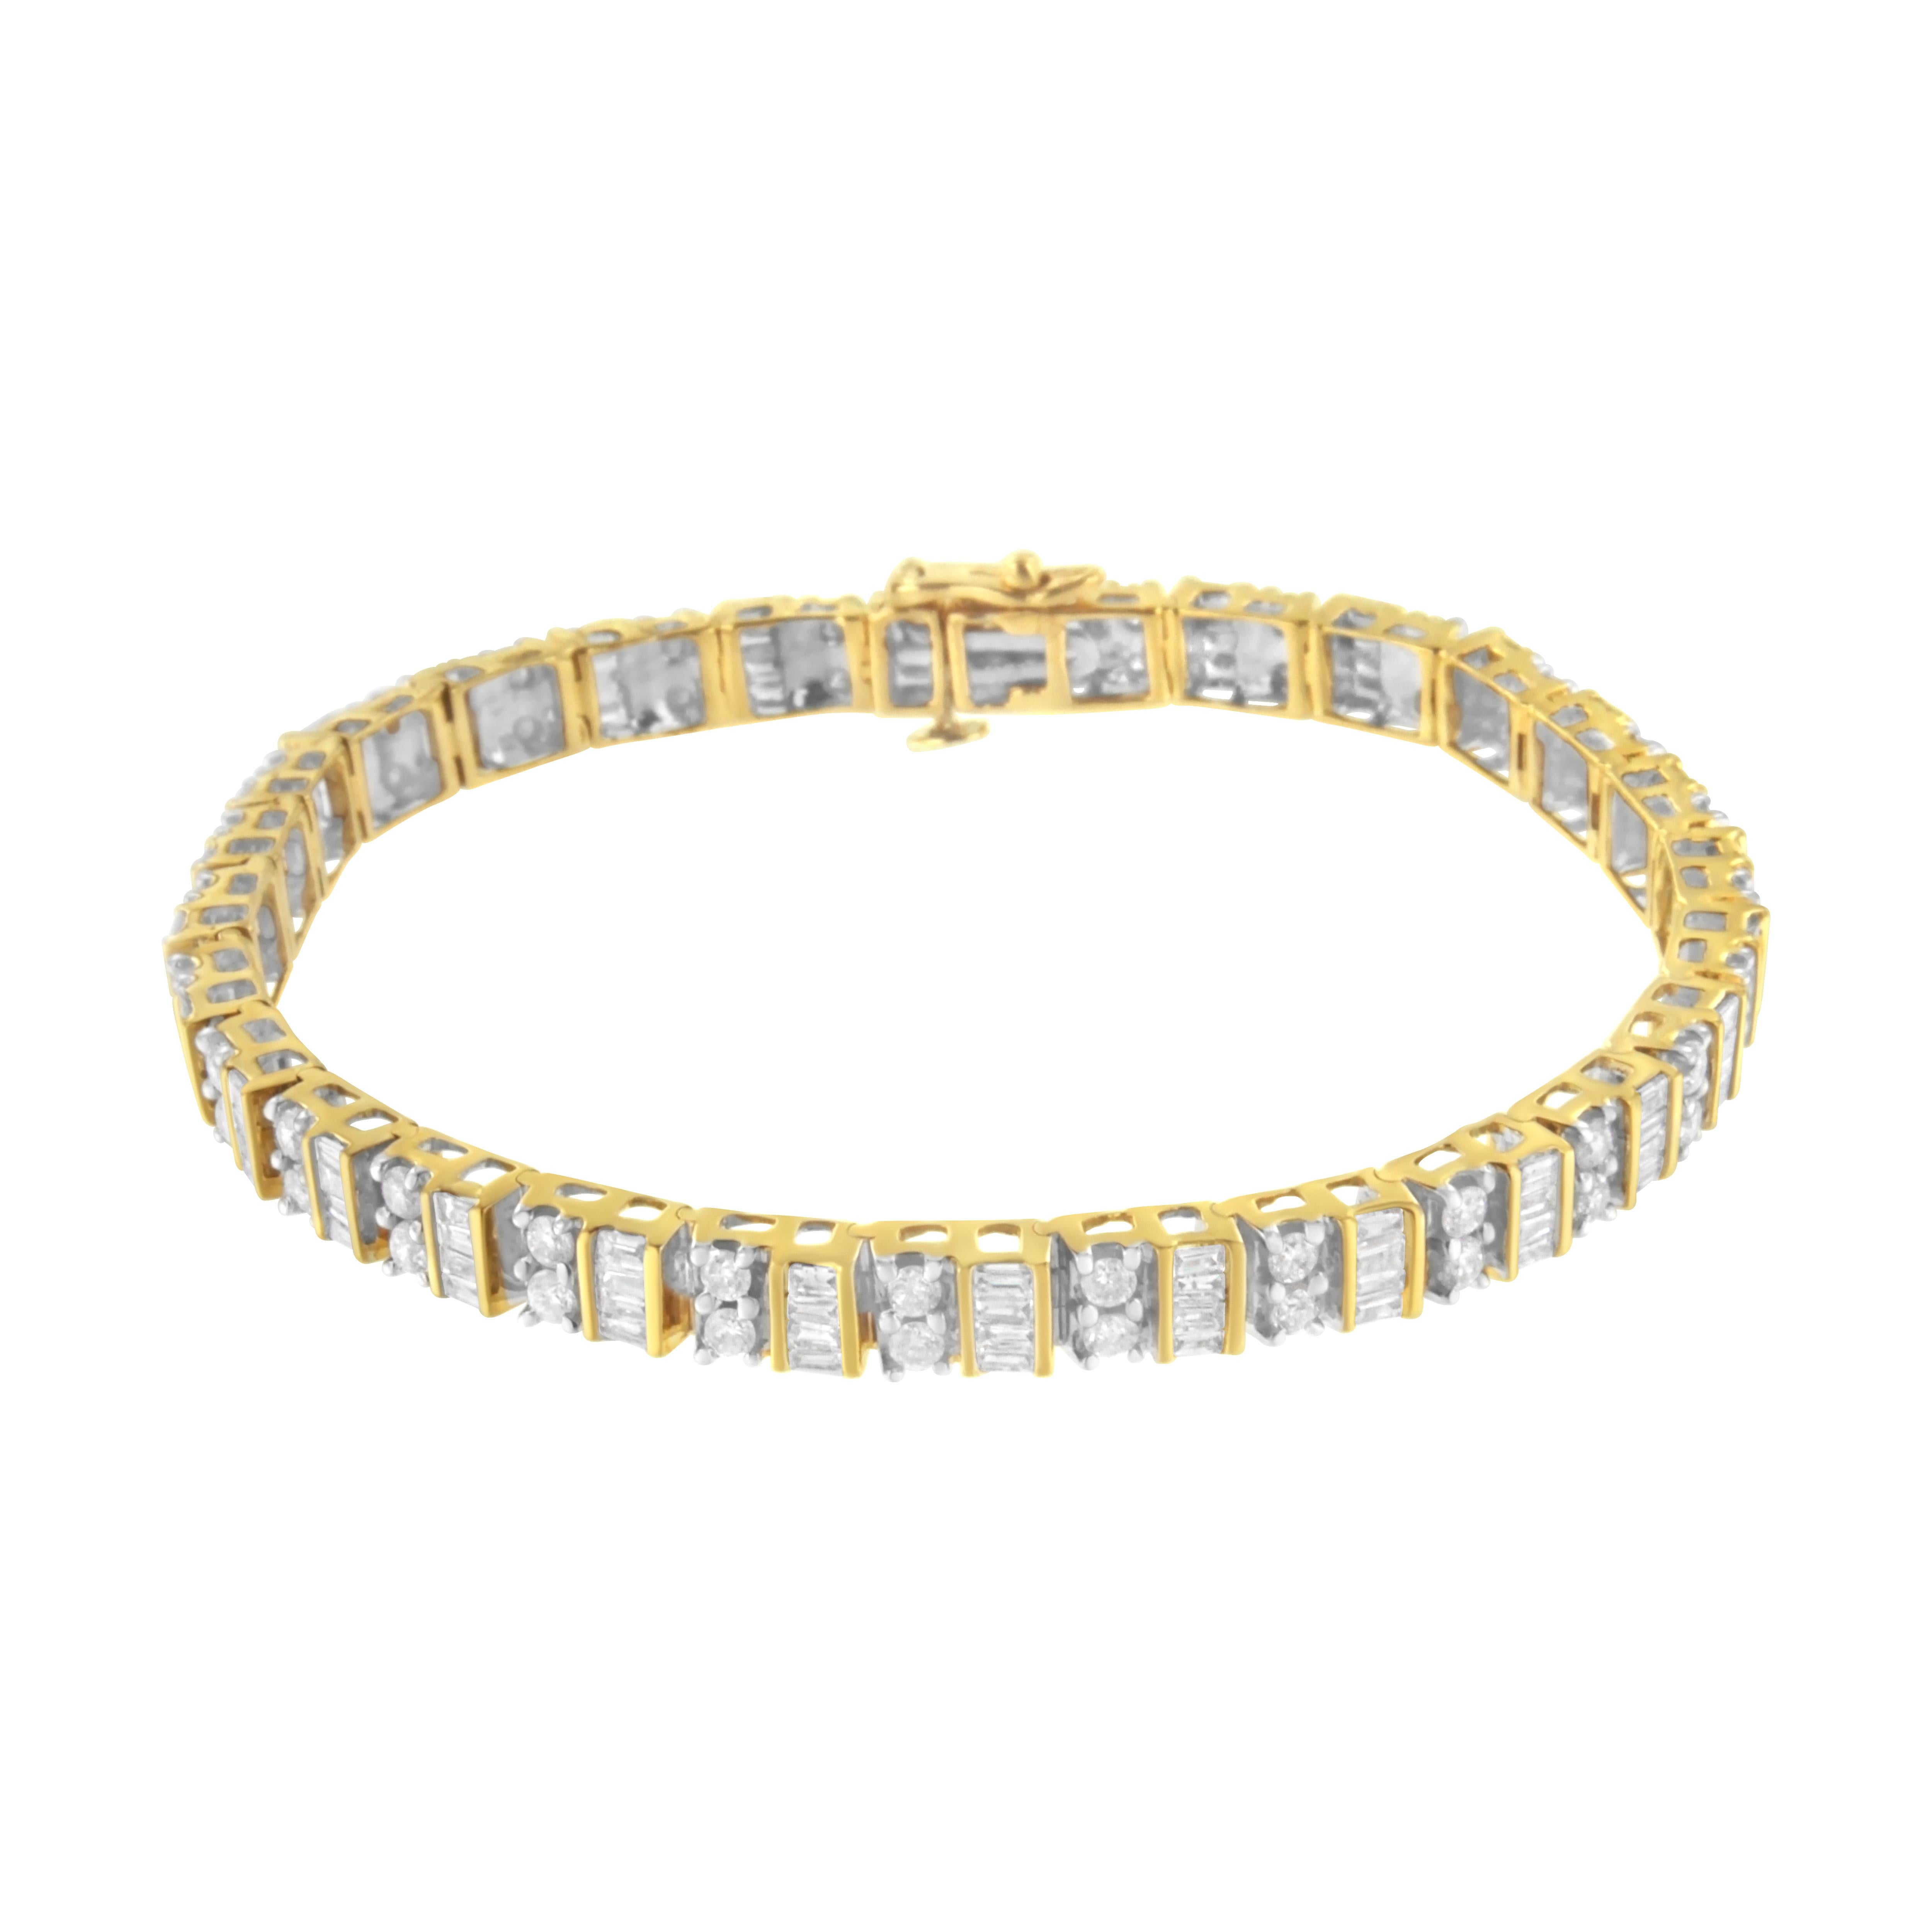 Experience the breathtaking fusion of classic elegance and modern sophistication with this resplendent tennis bracelet. Expertly crafted from precious 10K yellow gold, this stunning accessory showcases an exquisite alternating pattern of baguette